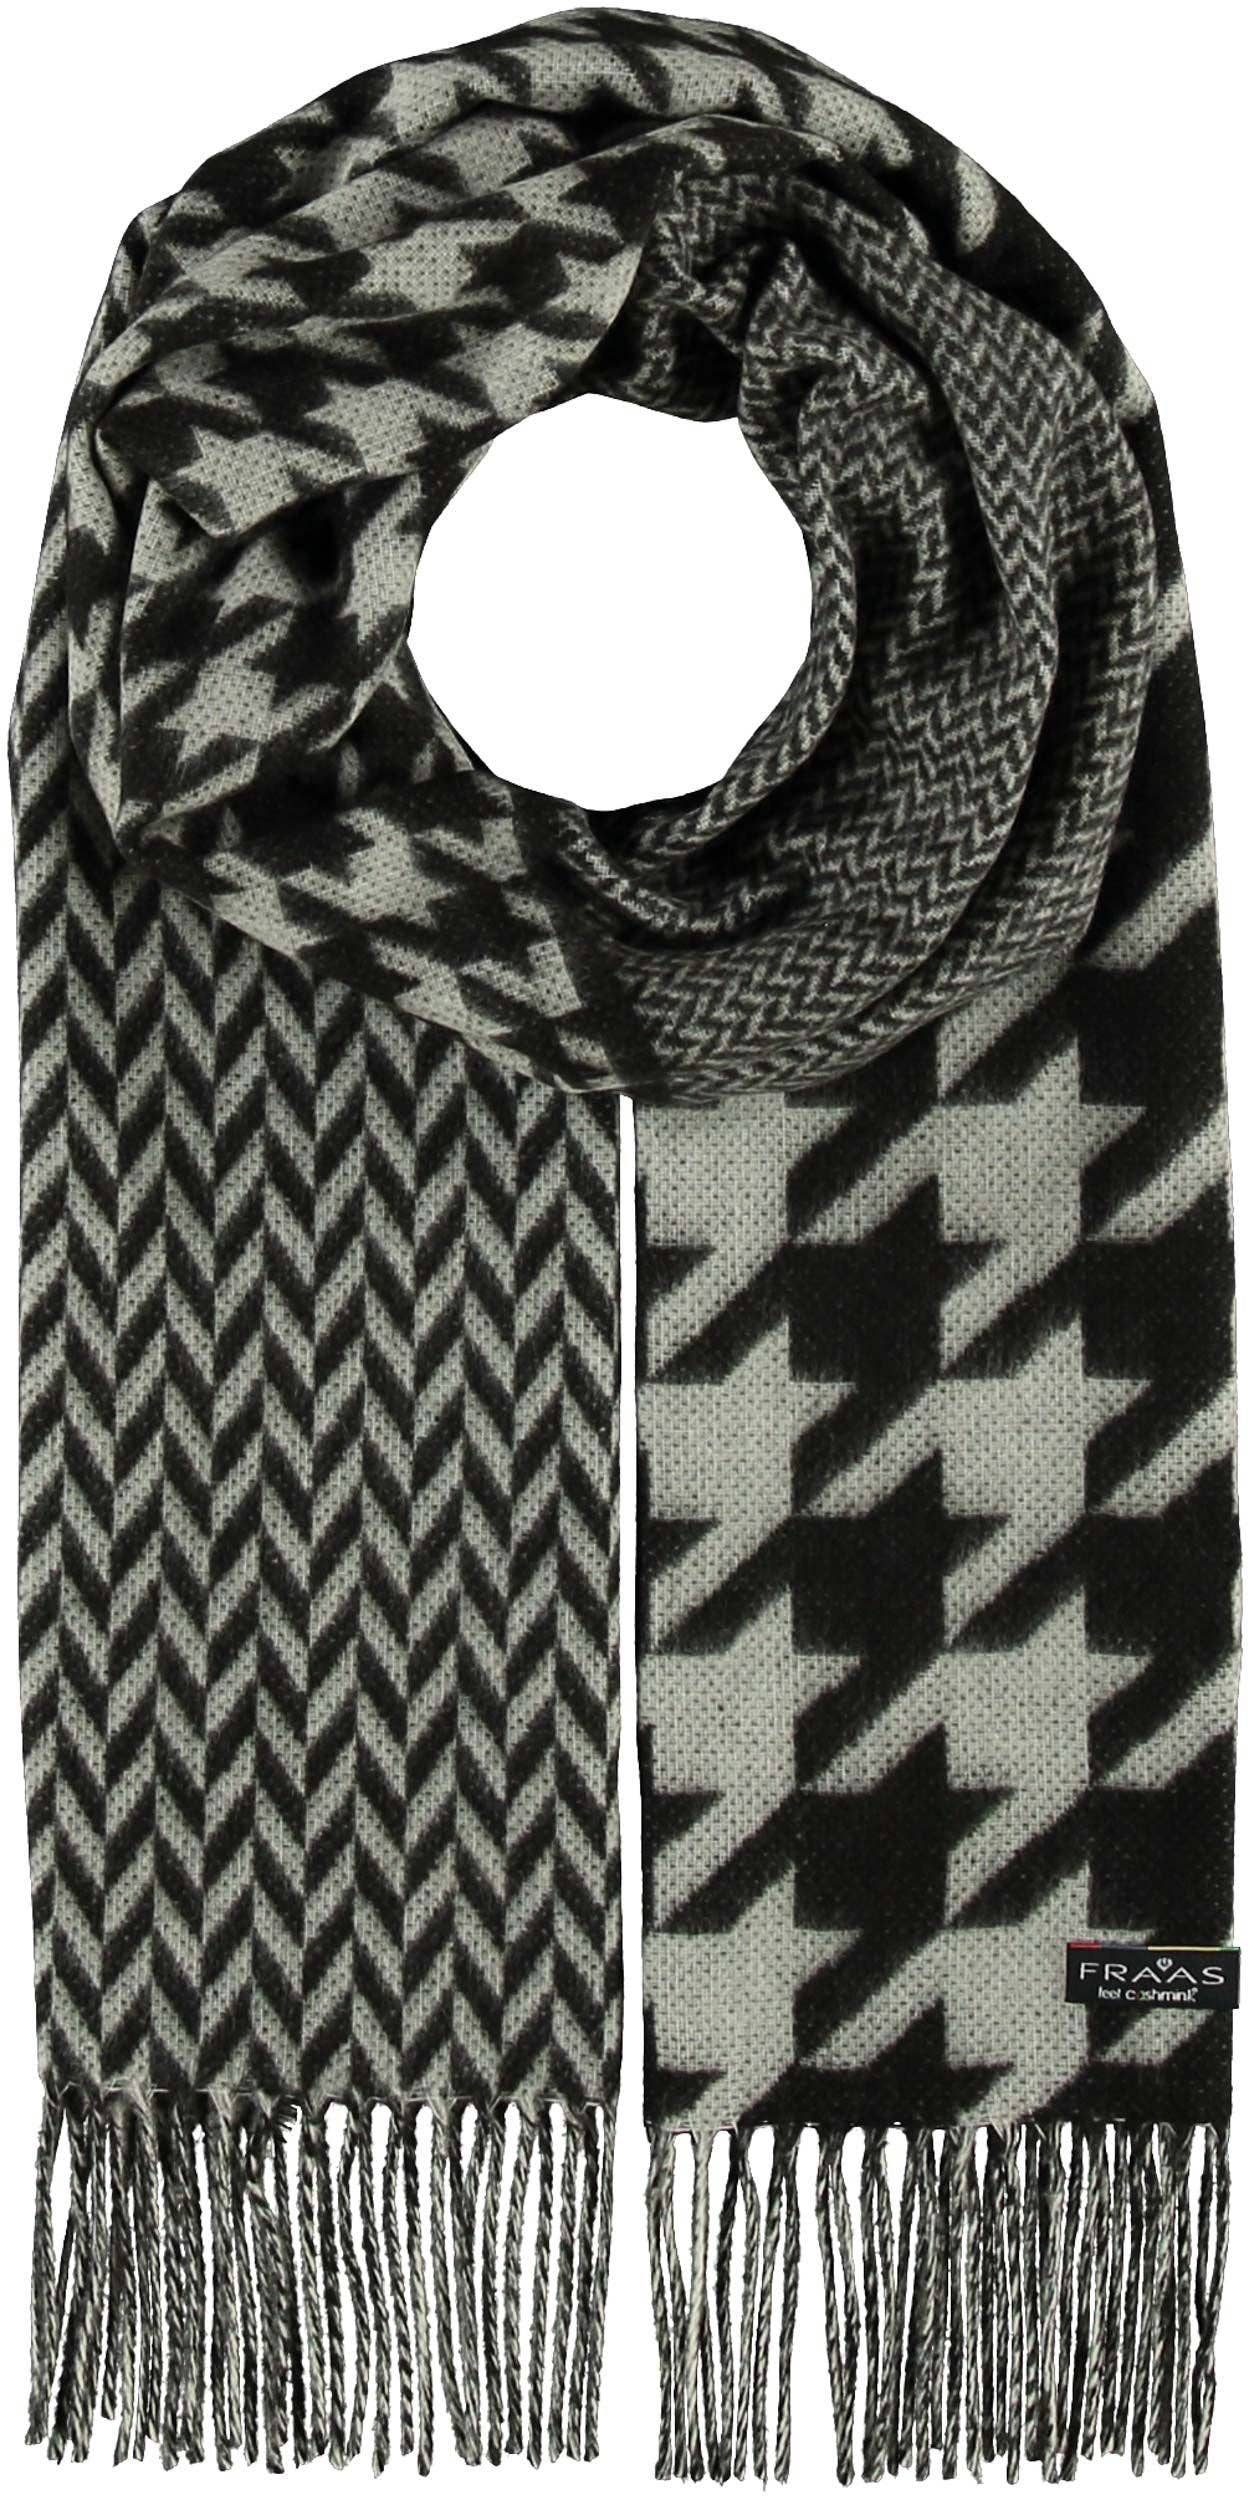 FRAAS - The Scarf Company - Patchwork Houndstooth Woven Cashmink® Scarf